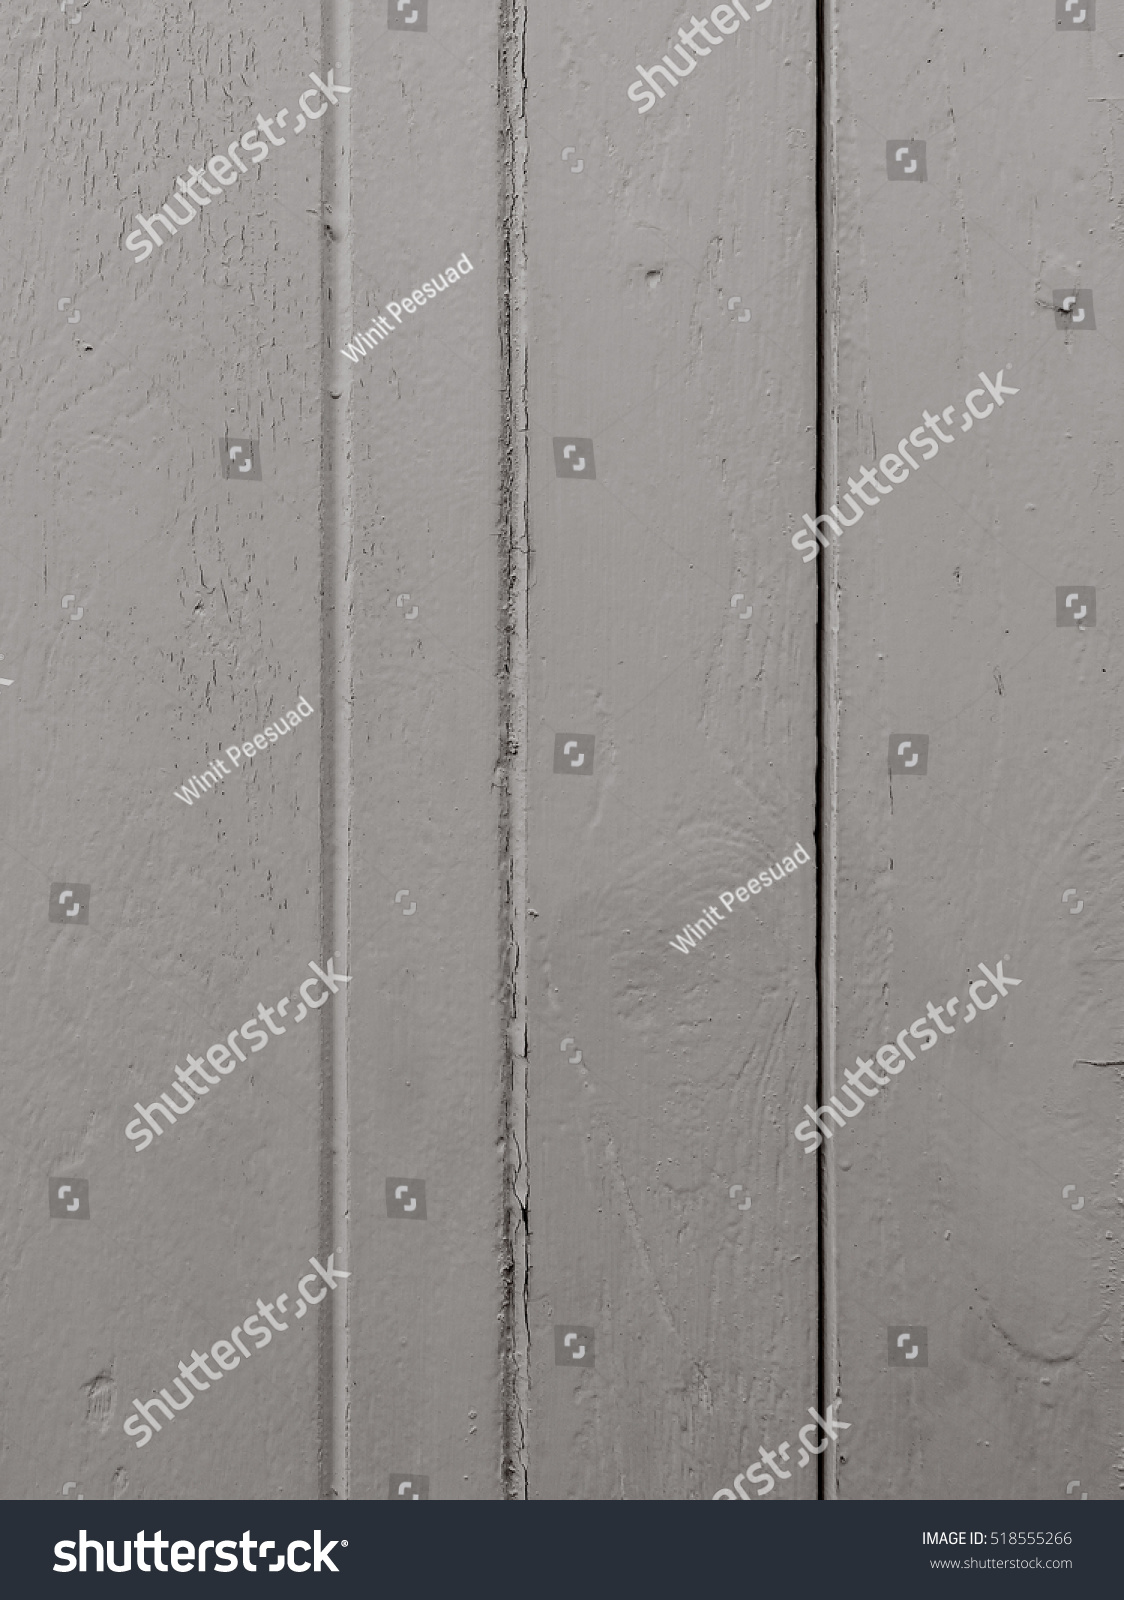 Wood wall texture and background. #518555266